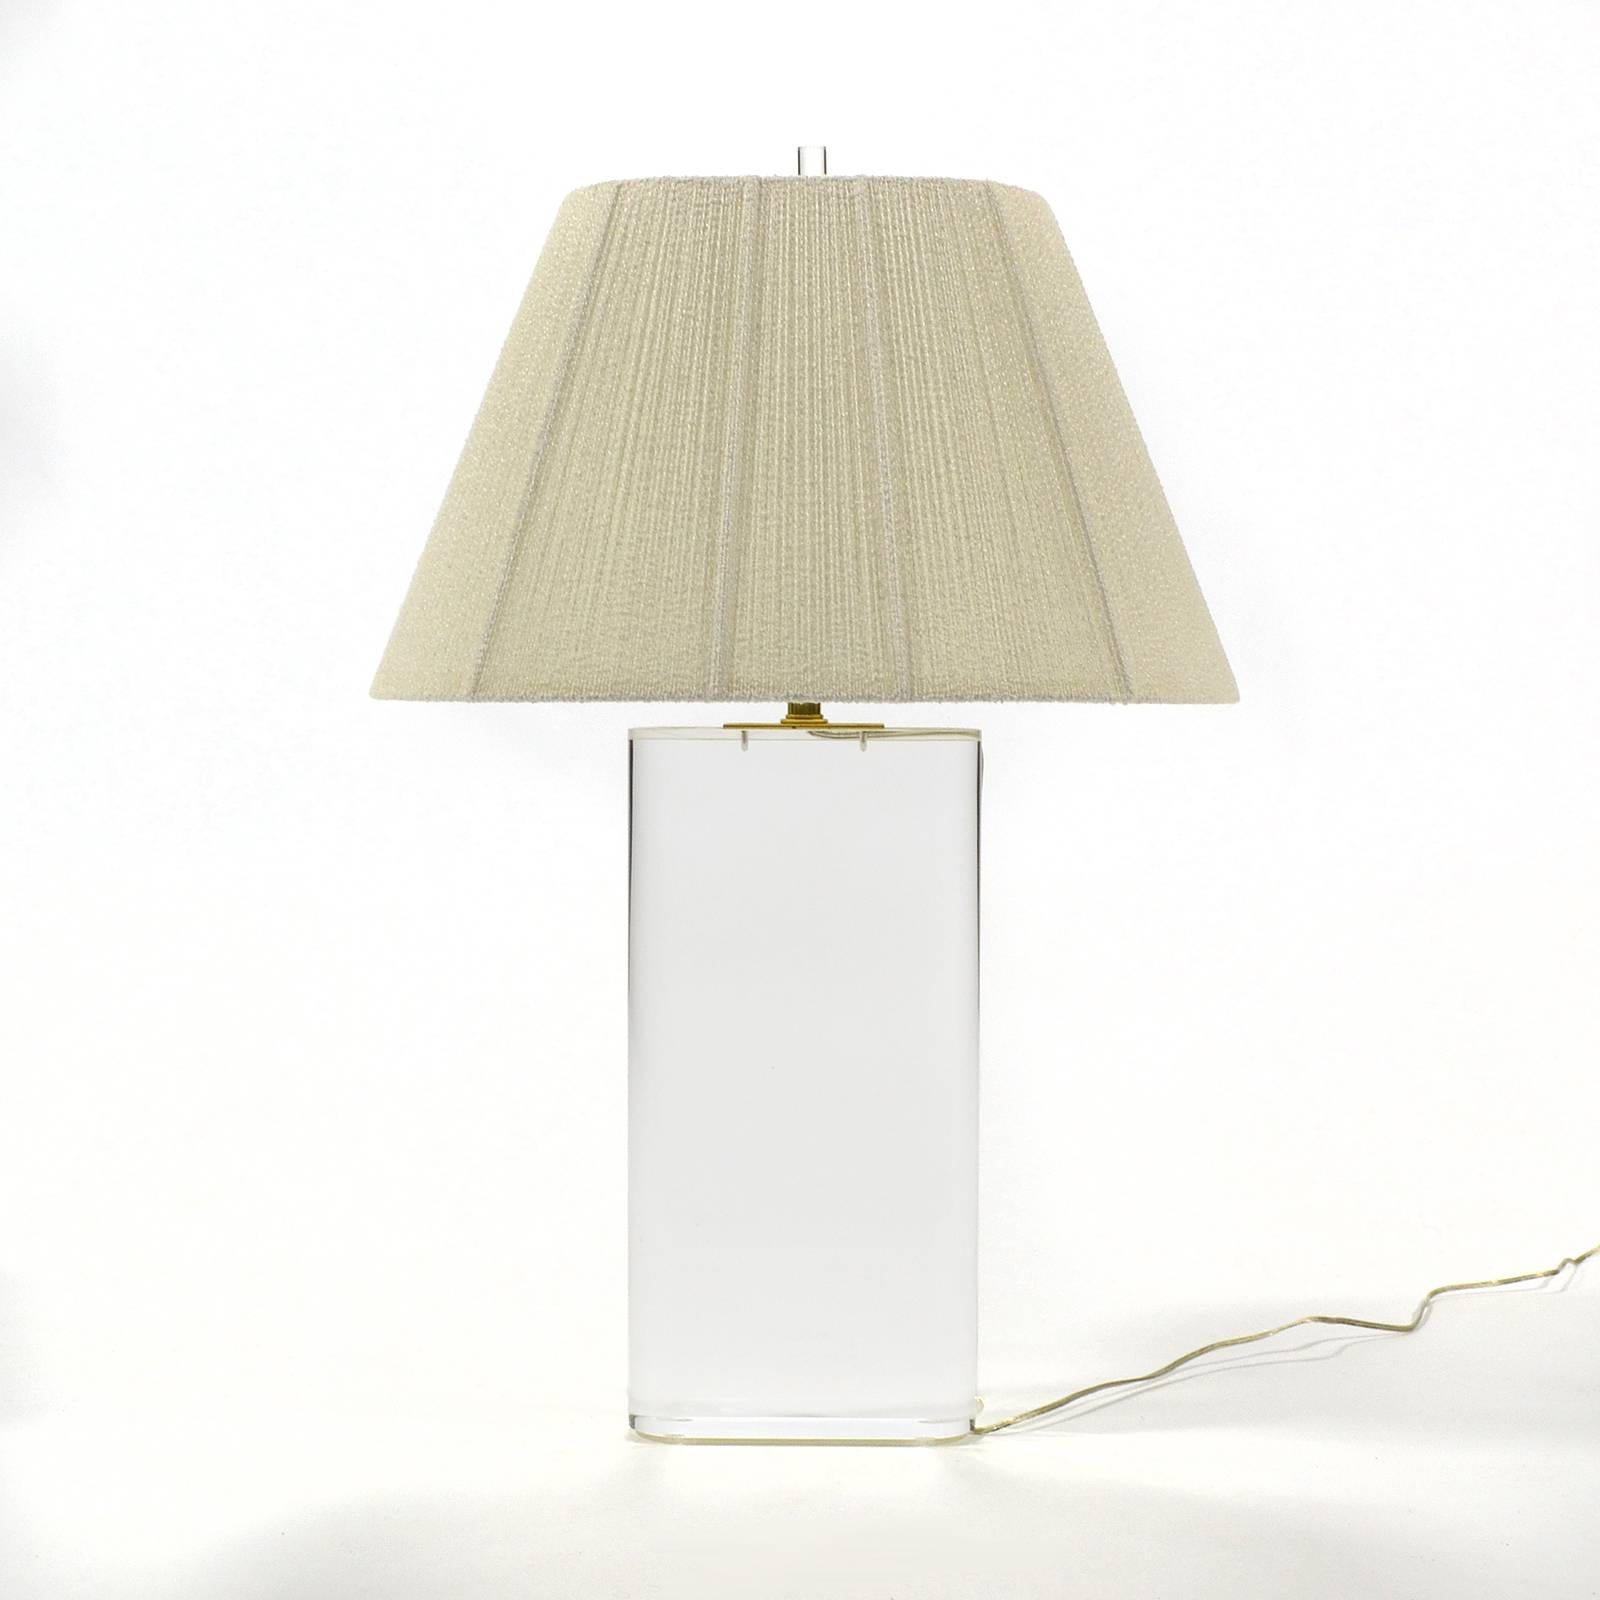 This spectacular table lamp has an oval base of three inch thick Lucite, the finest quality brass hardware, a perfectly matched shade of silky string and matching Lucite finial. The spare minimal form perfectly compliments the transparent material